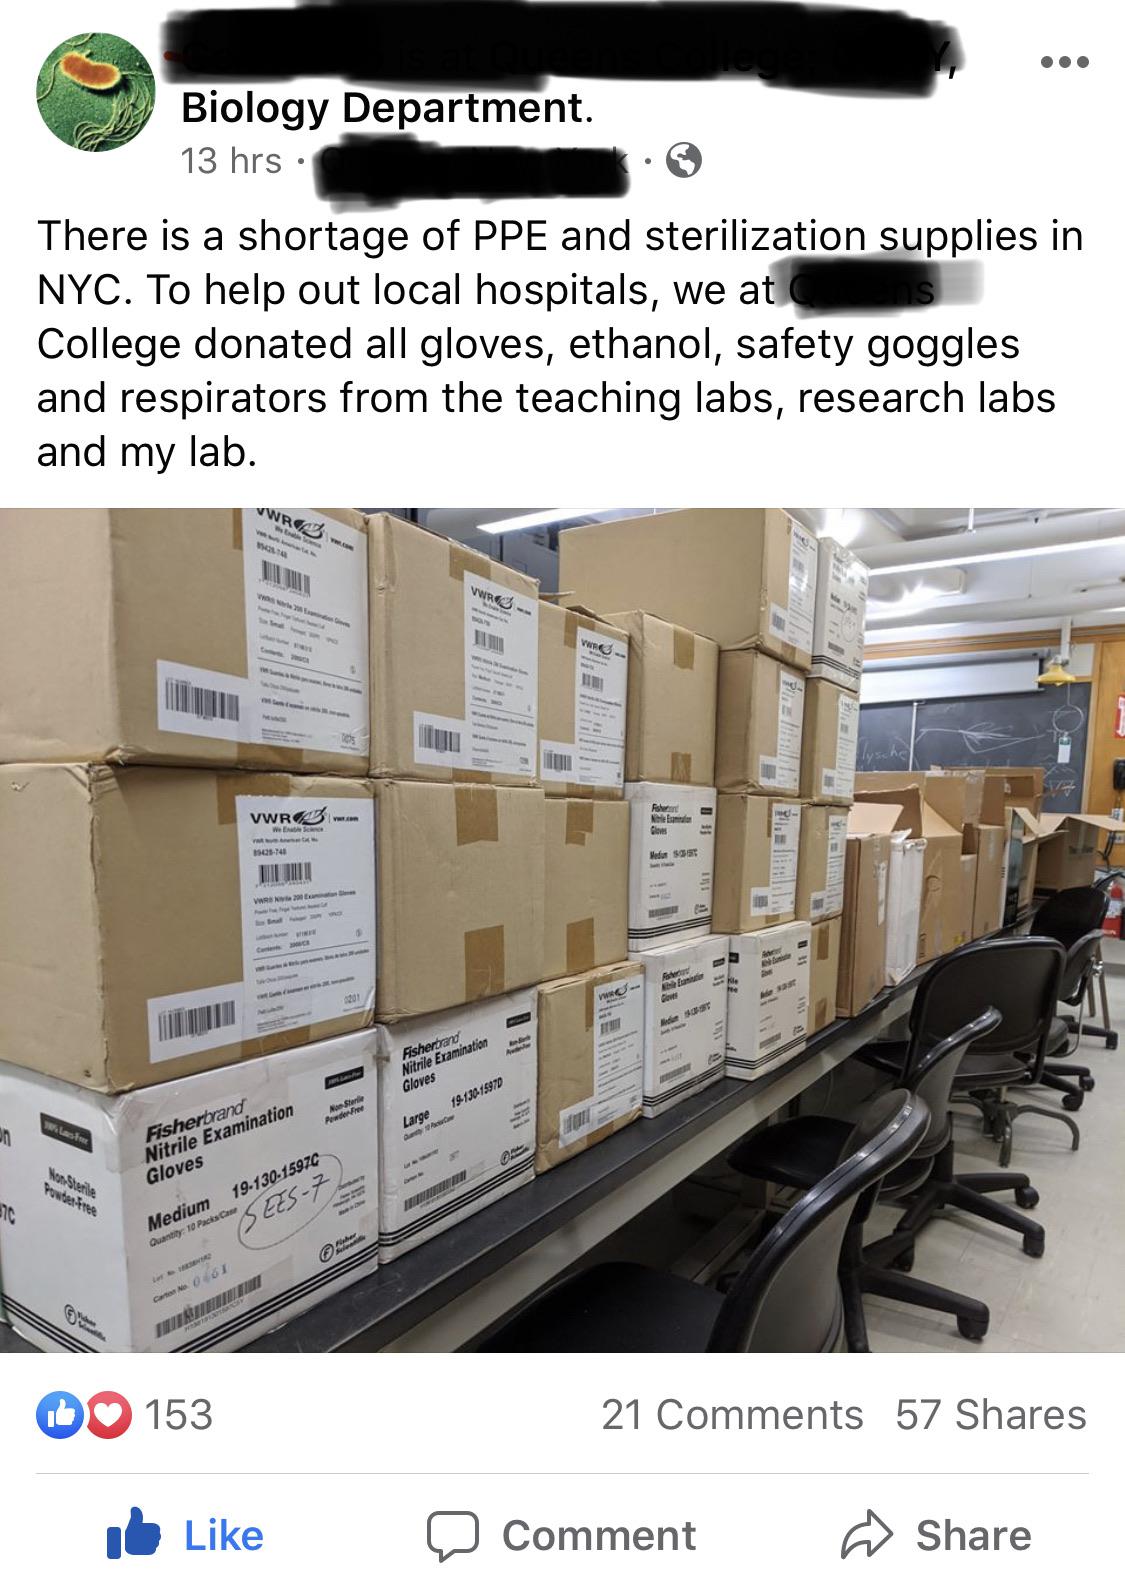 furniture - Biology Department. 13 hrs There is a shortage of Ppe and sterilization supplies in Nyc. To help out local hospitals, we at College donated all gloves, ethanol, safety goggles and respirators from the teaching labs, research labs and my lab. V